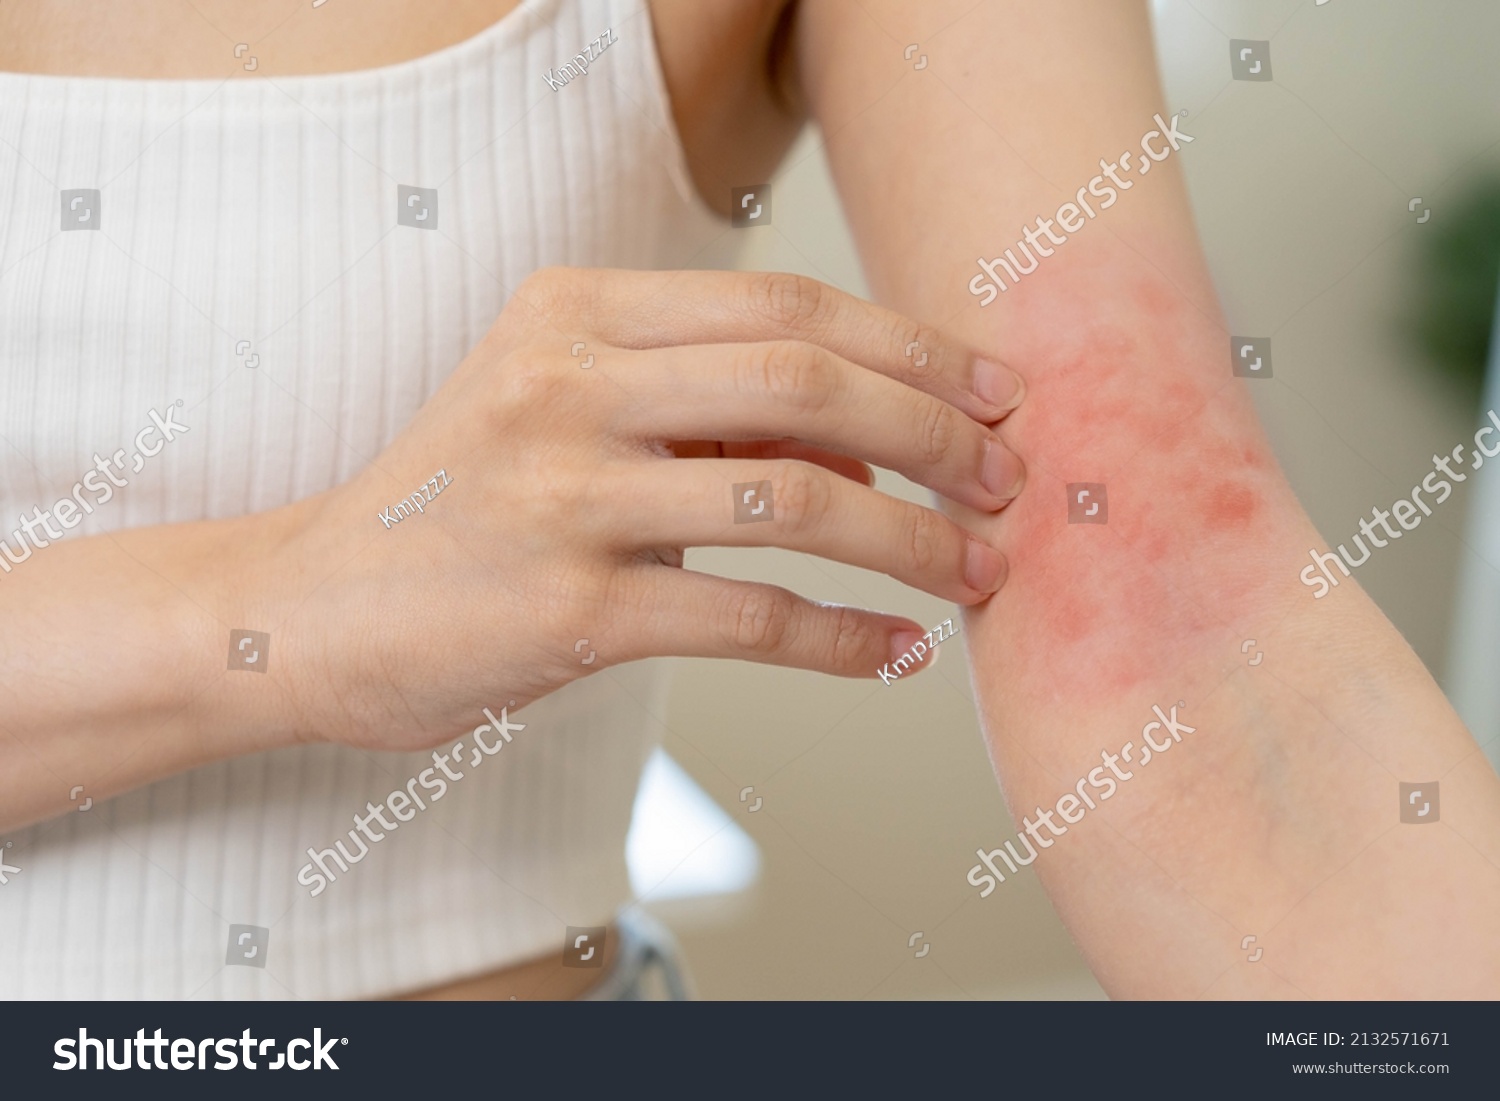 Dermatology, asian young woman, girl hand in her arm allergy, allergic reaction from atopic, insect bites, hand in scratching itchy, itch red spot or rash of skin. Beauty problem by medical treatment. #2132571671